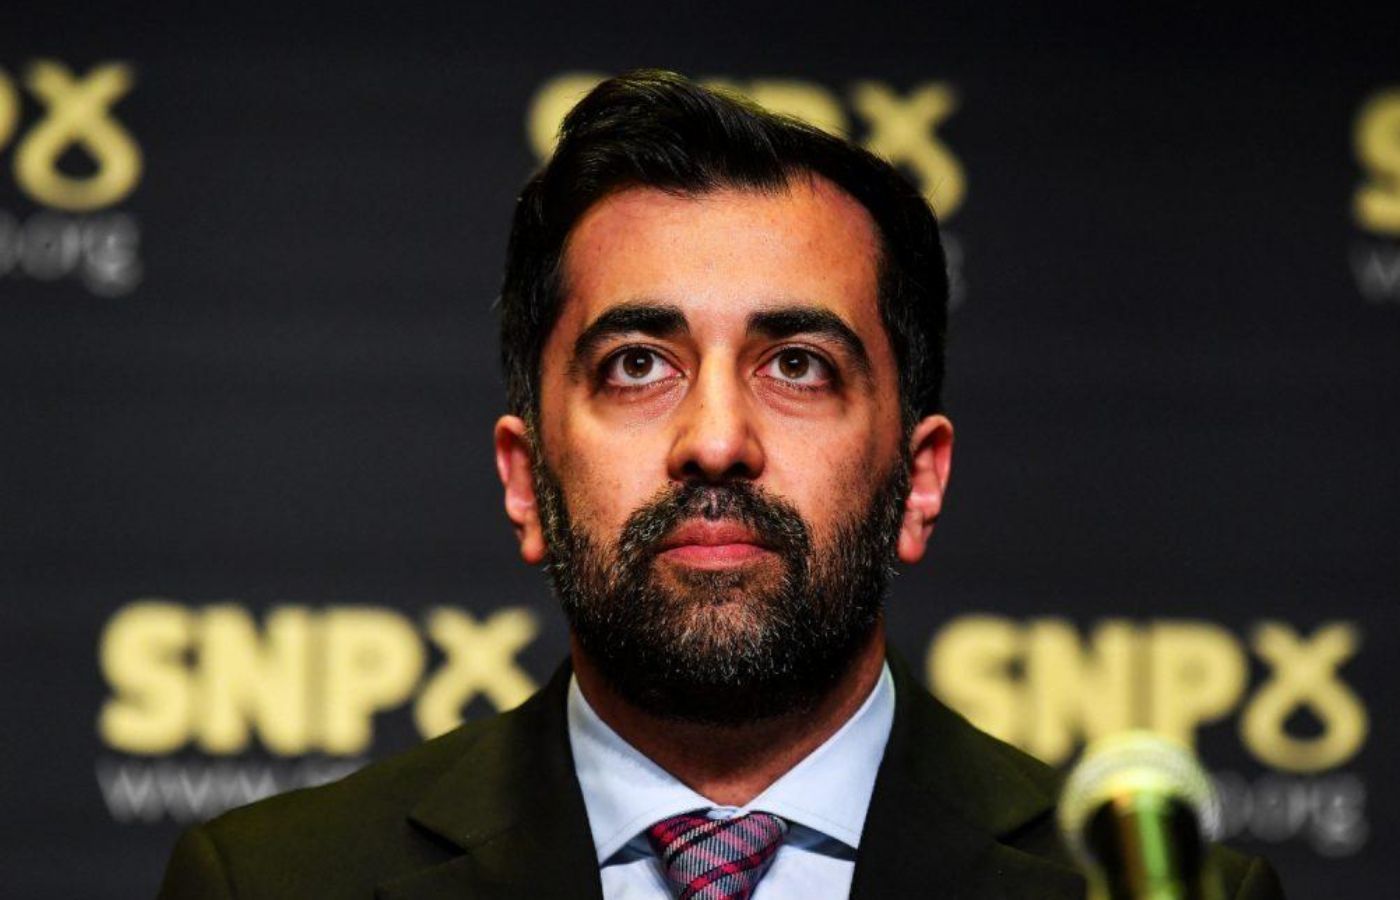 Humza Yousaf said the 'democratic will of the Scottish Parliament is under attack'.